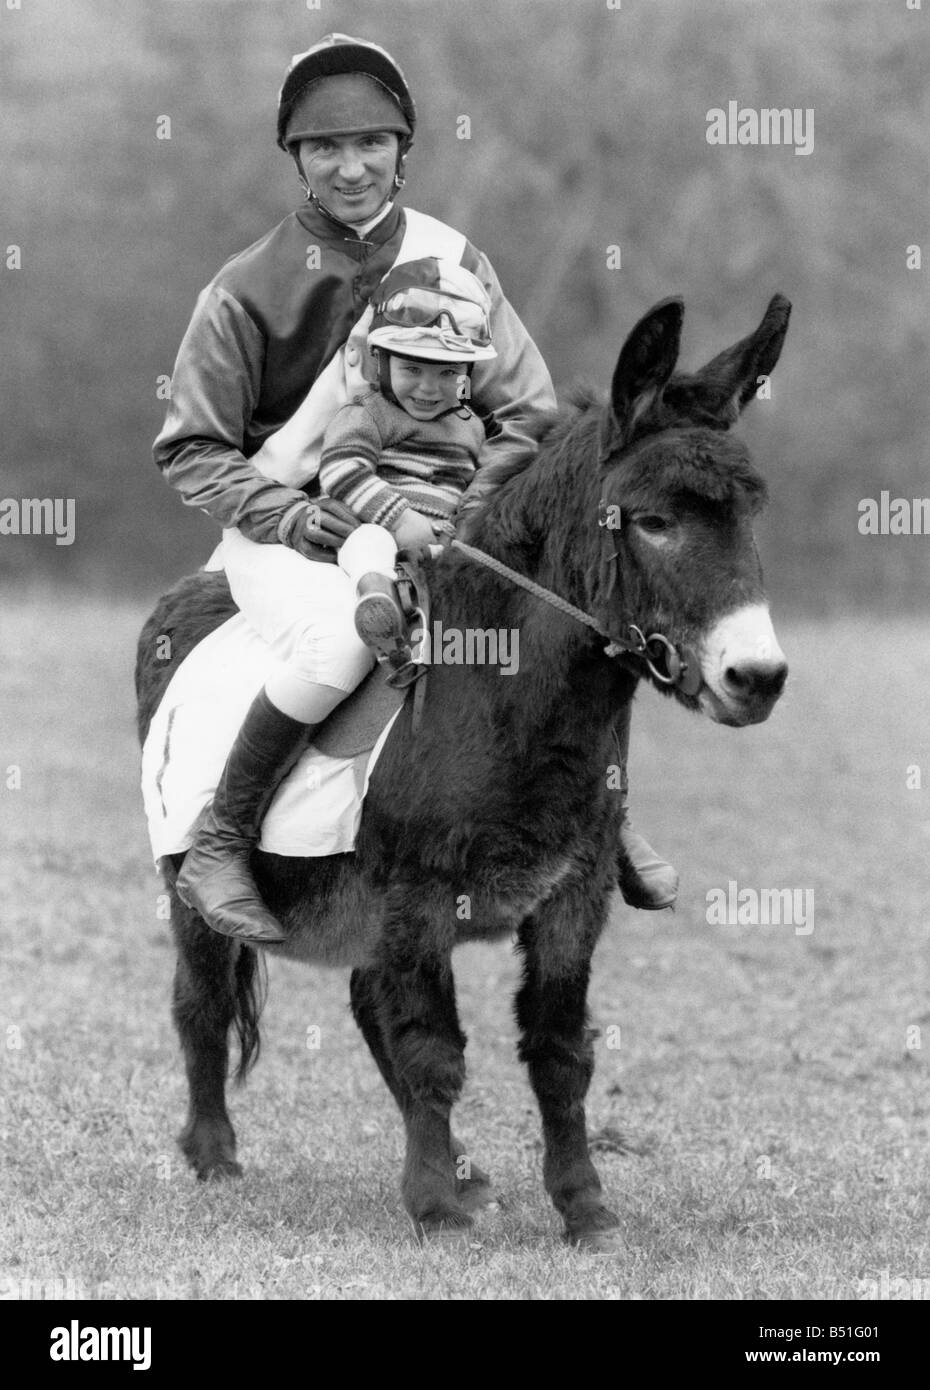 Diddy Daniel Frost aims to gallop in the footsteps of his famous dad but he knows there's a lot of donkey work to do. Dec. 1989 Stock Photo